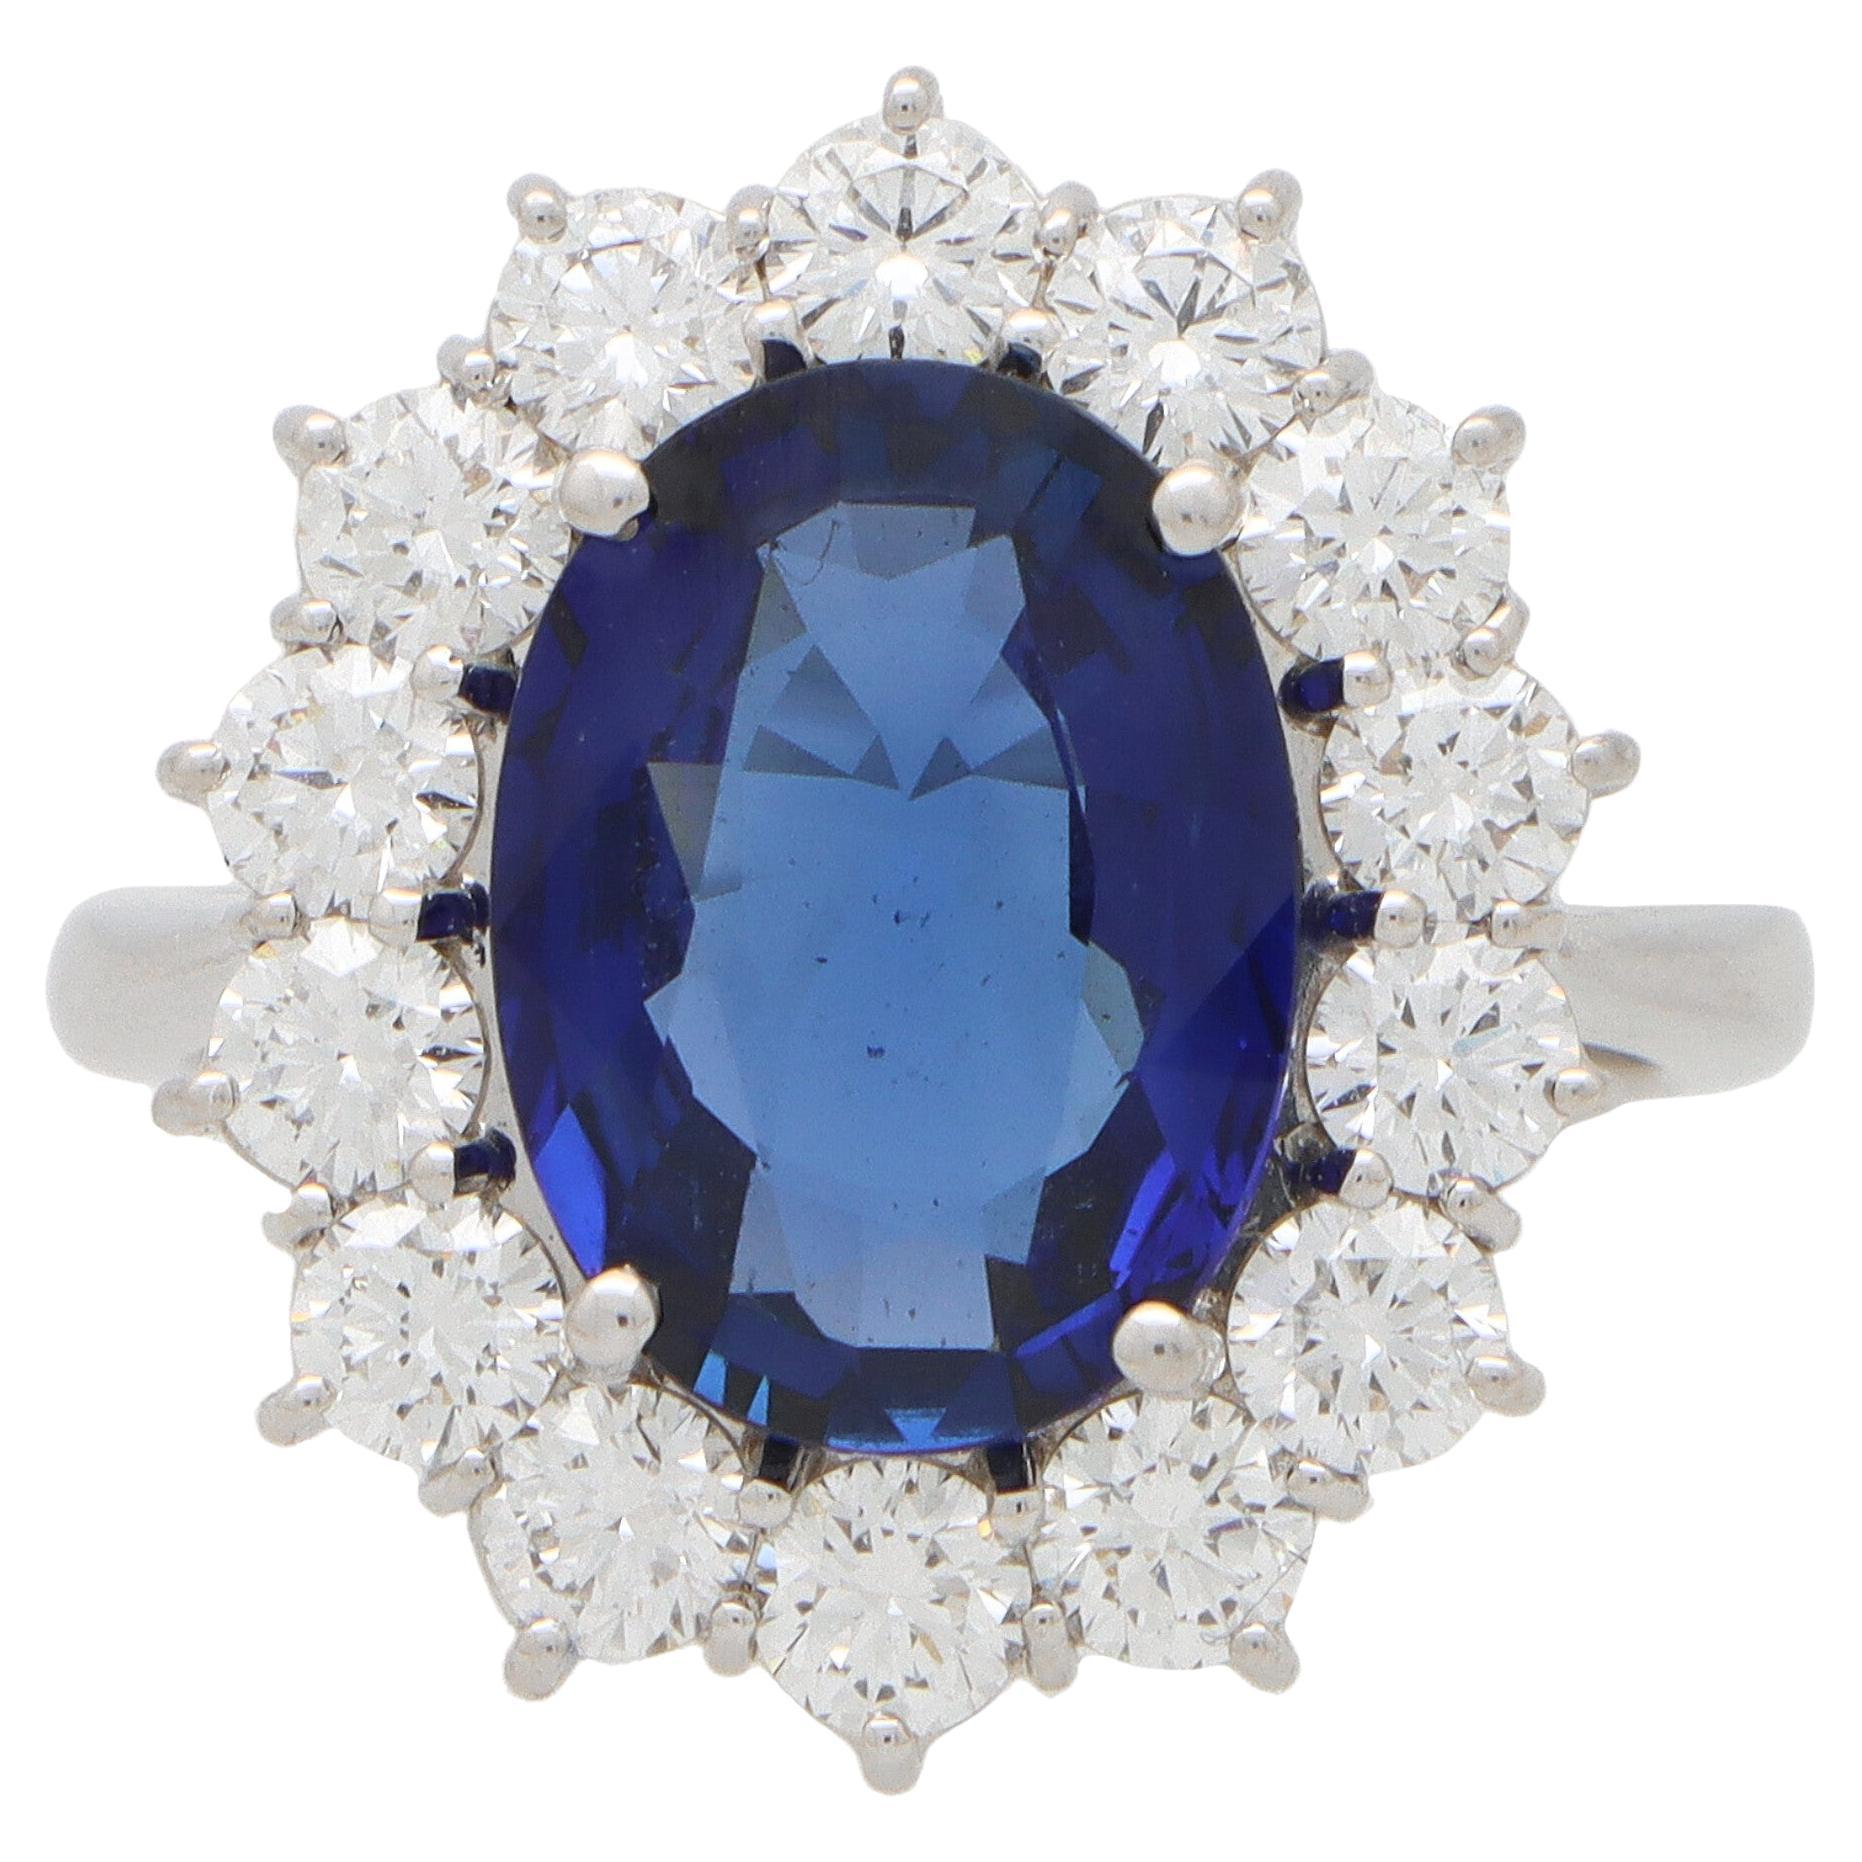 Vintage 5.00ct Sapphire and Diamond Cluster Ring Set in 18k White Gold